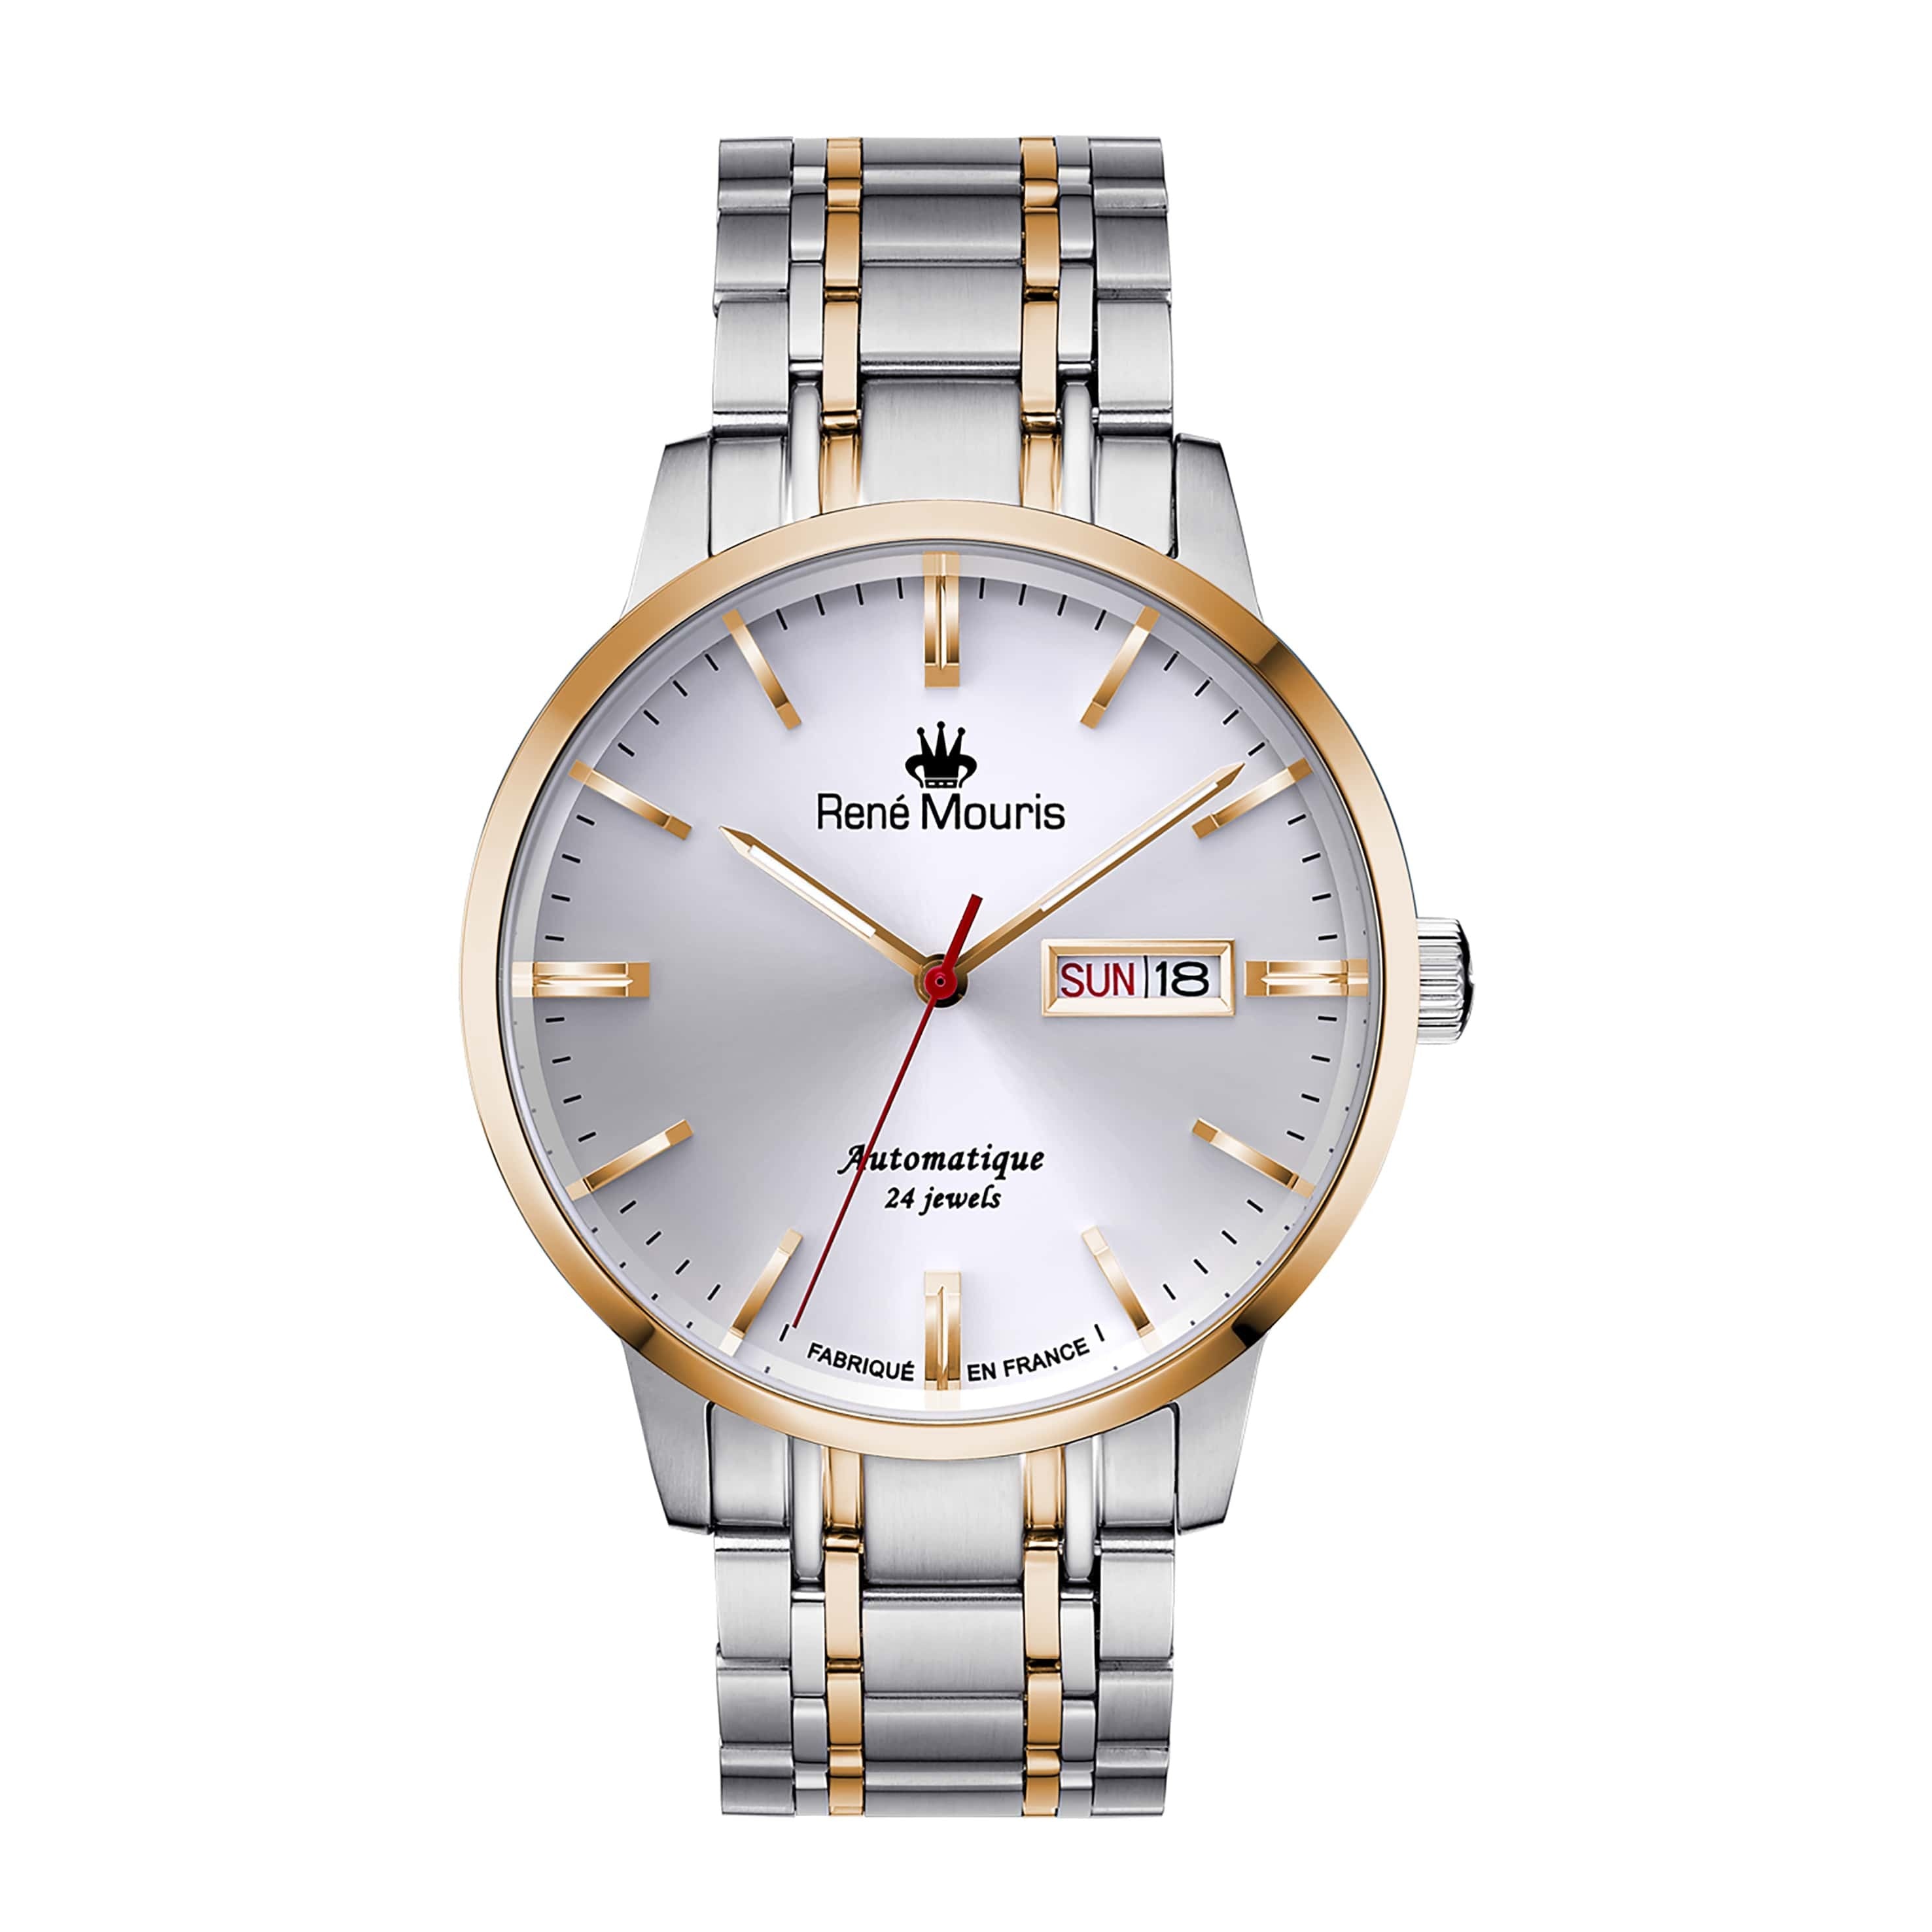 RENE MOURIS Noblesse Series Automatic Watch Gents